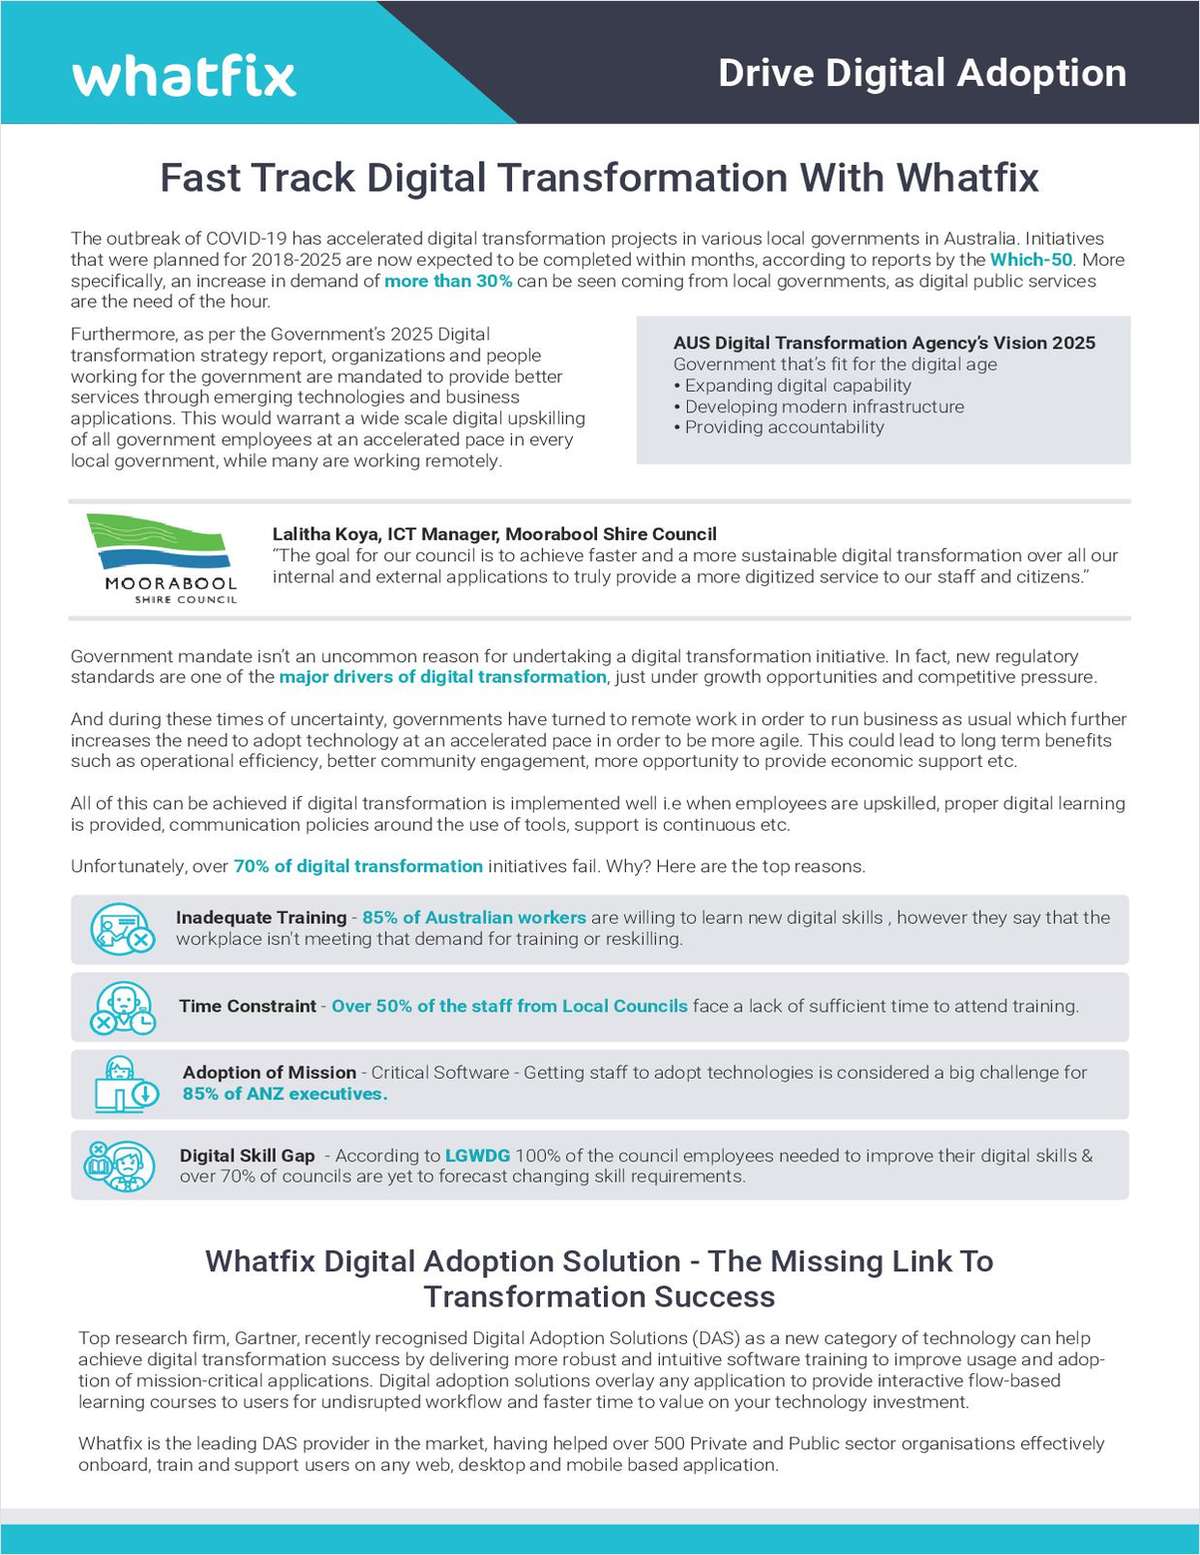 Is Your Local Council Missing The Mark On Digital Transformation? Download Our Short Paper To Find Out Why, And How You Can Course Correct Quickly With Whatfix.